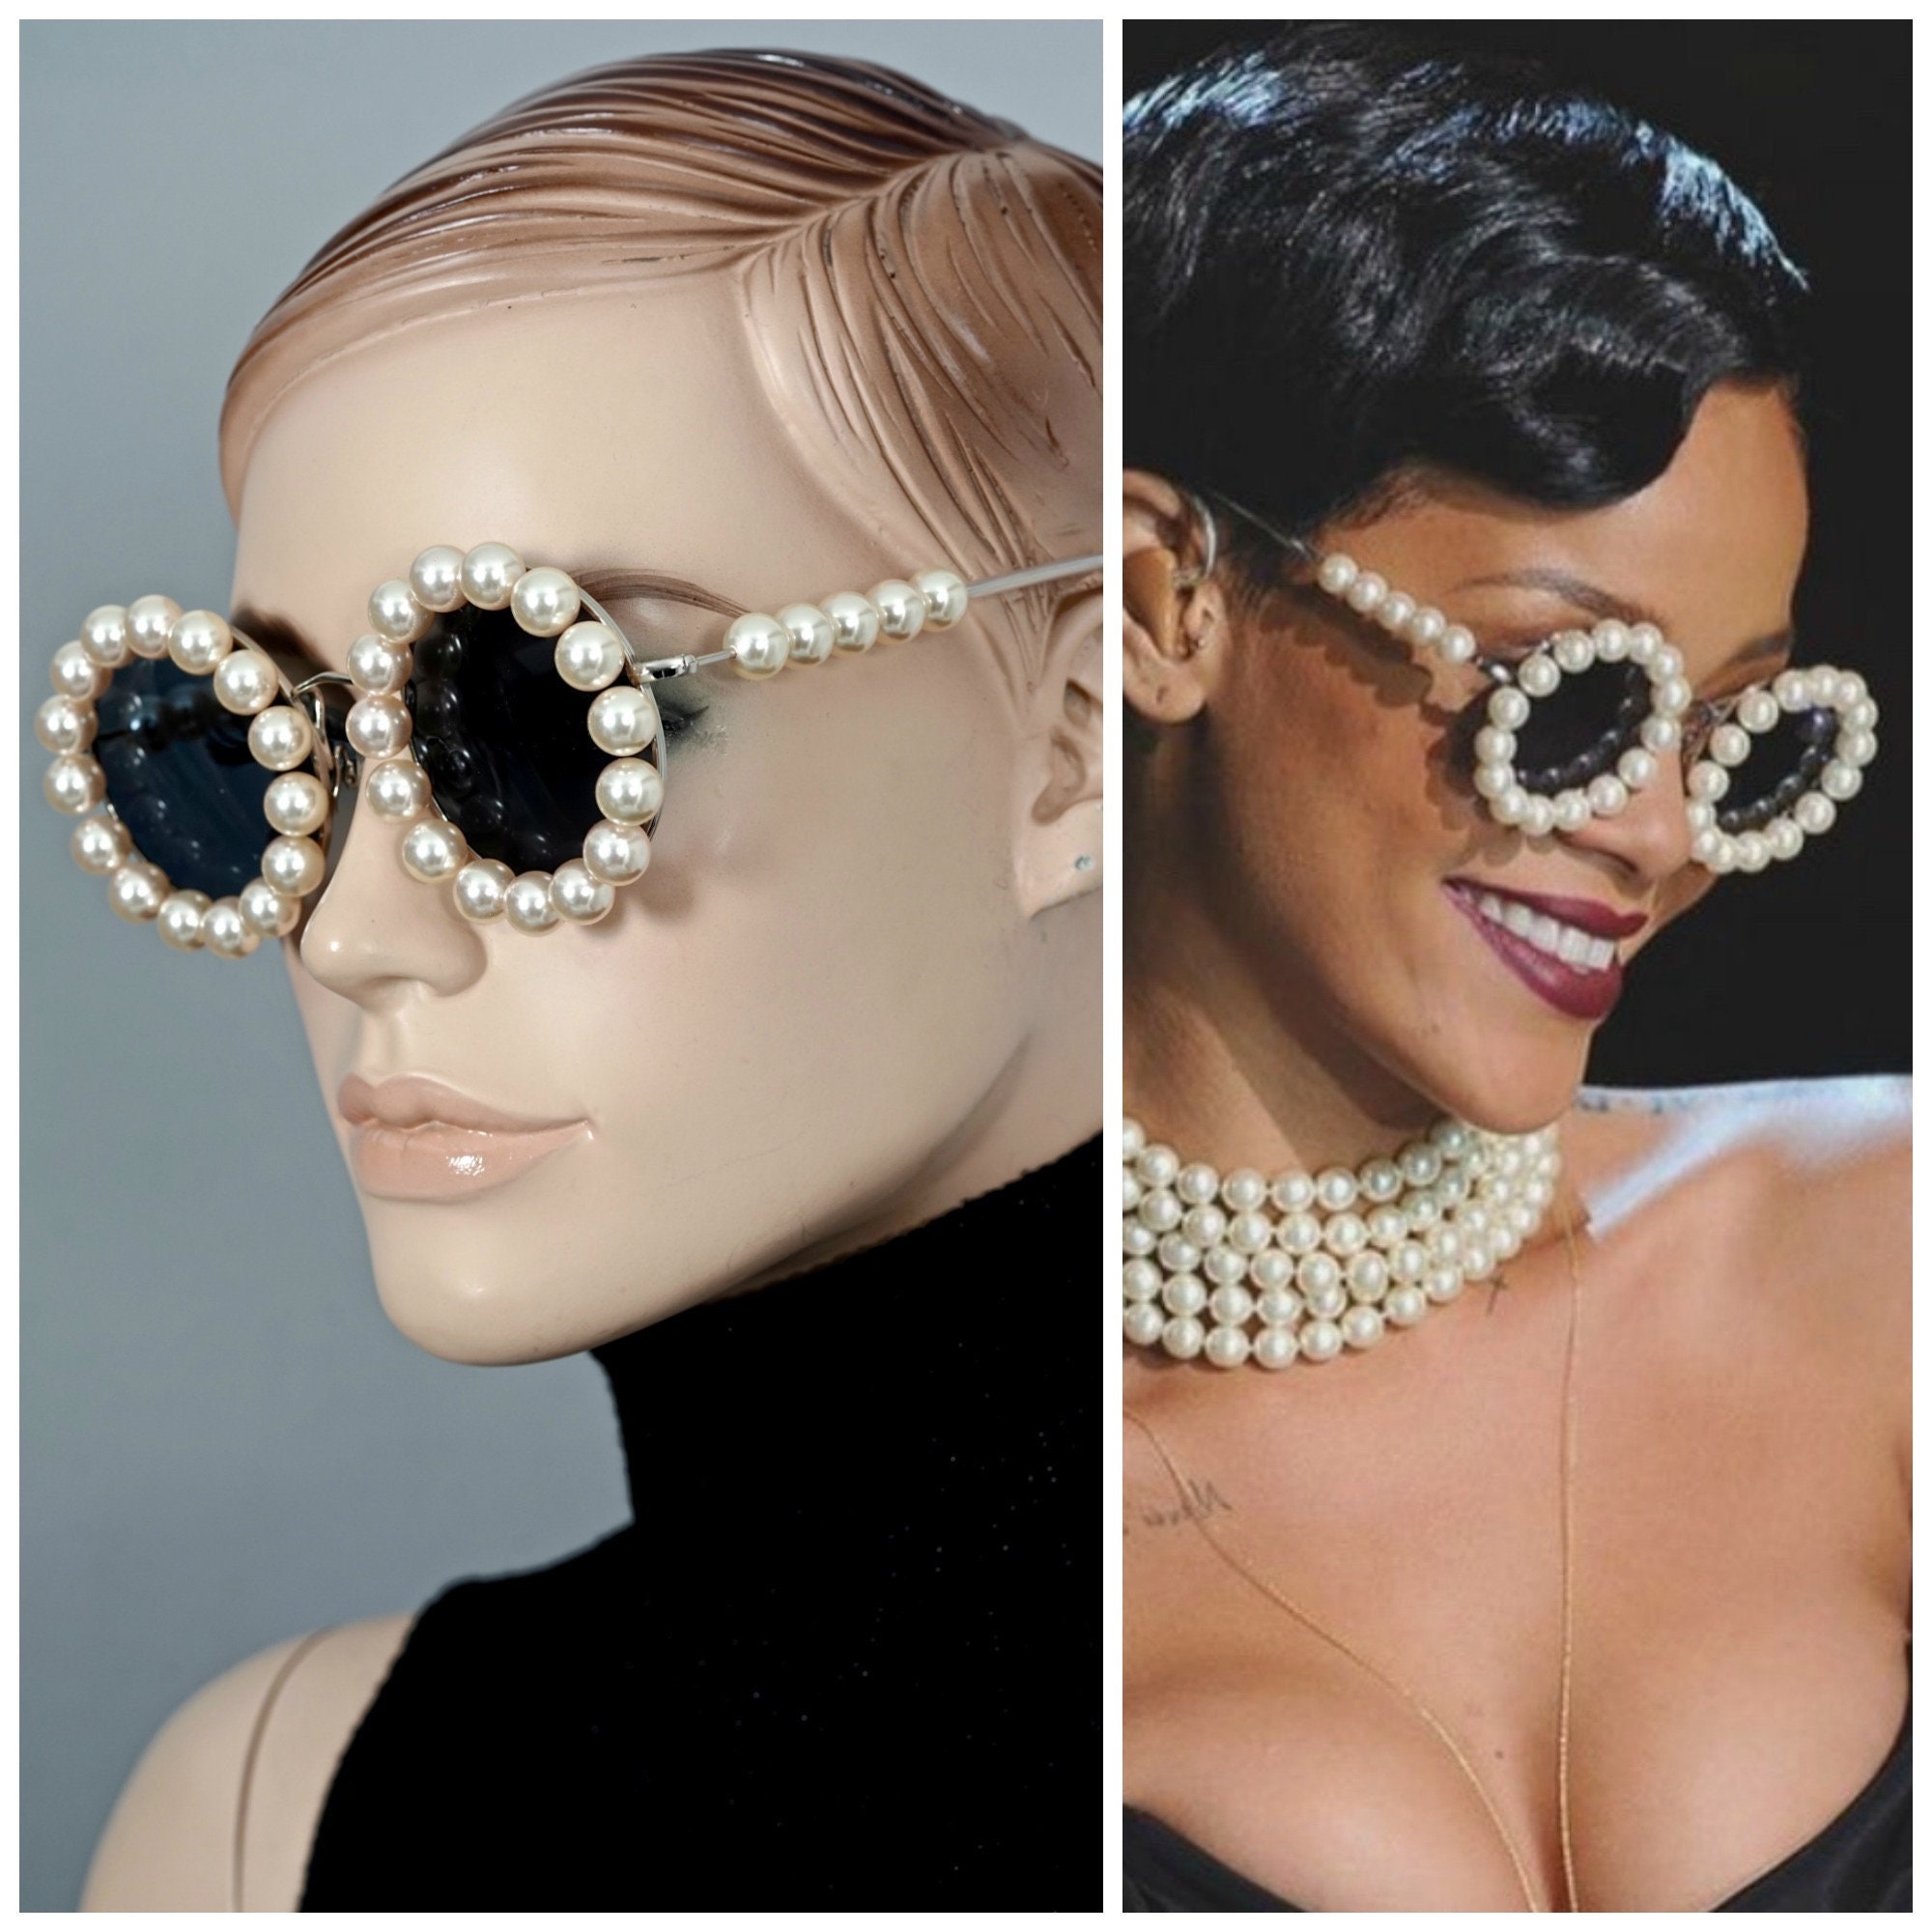 When you want the Chanel round sunglasses, but remember you have